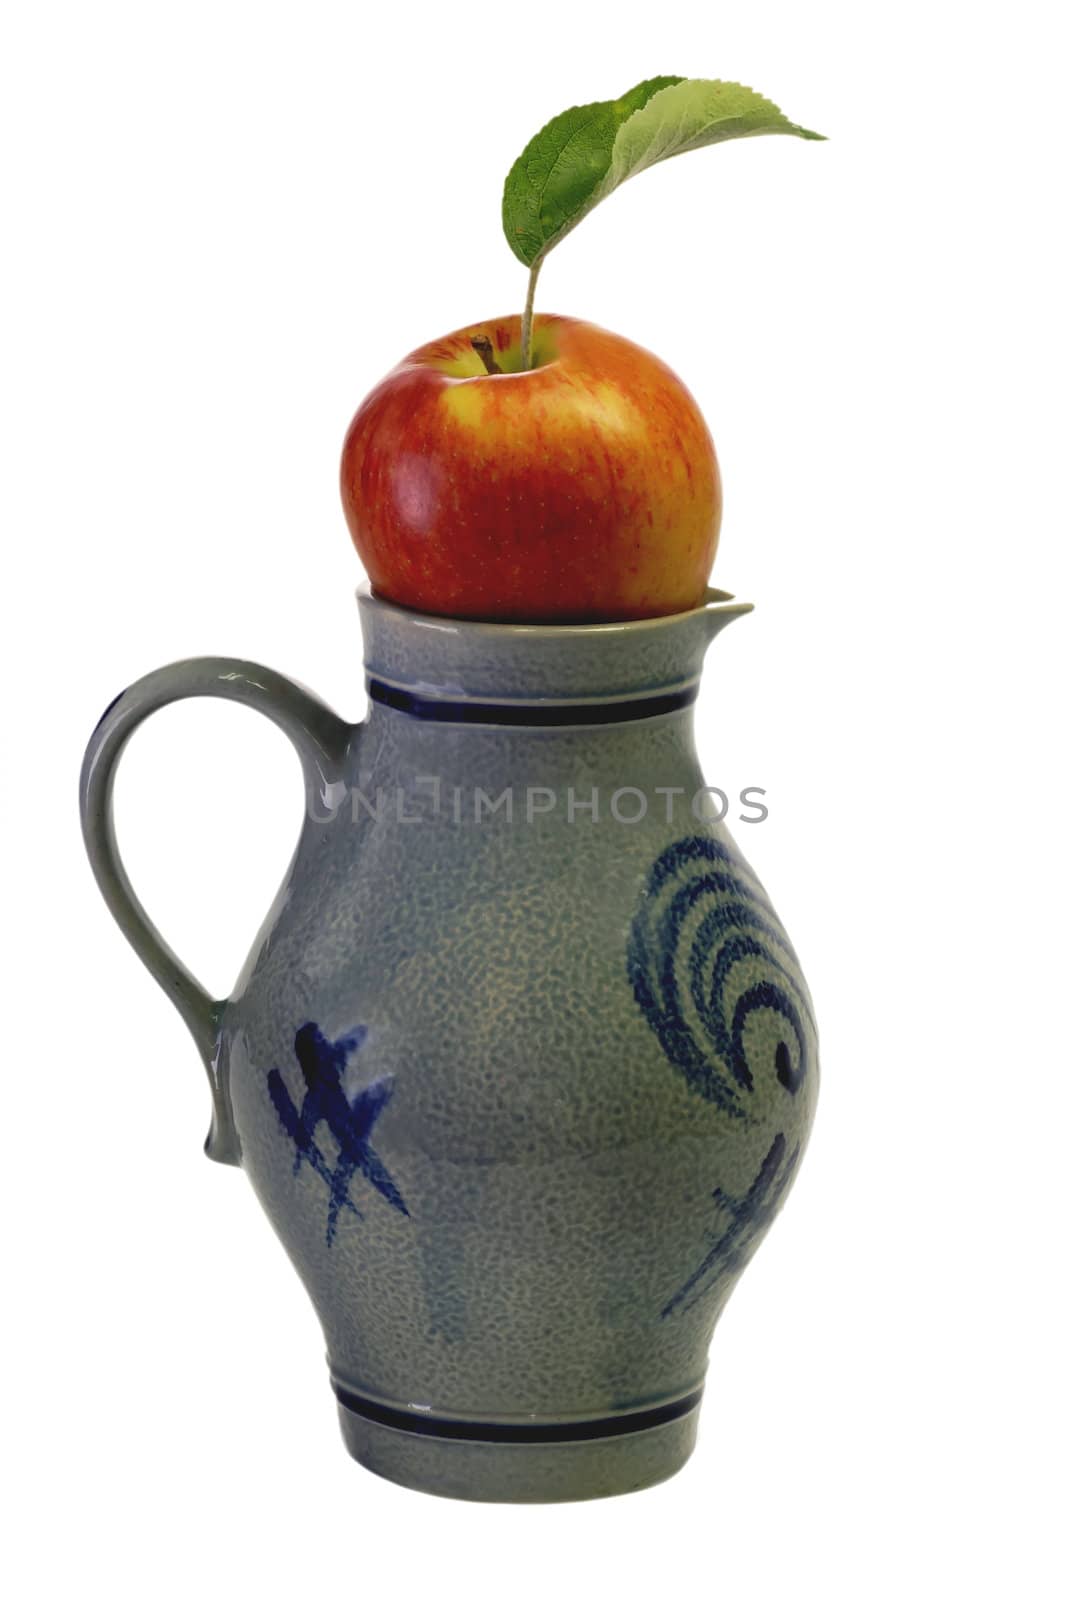 Jug of apple wine with an apple on white background